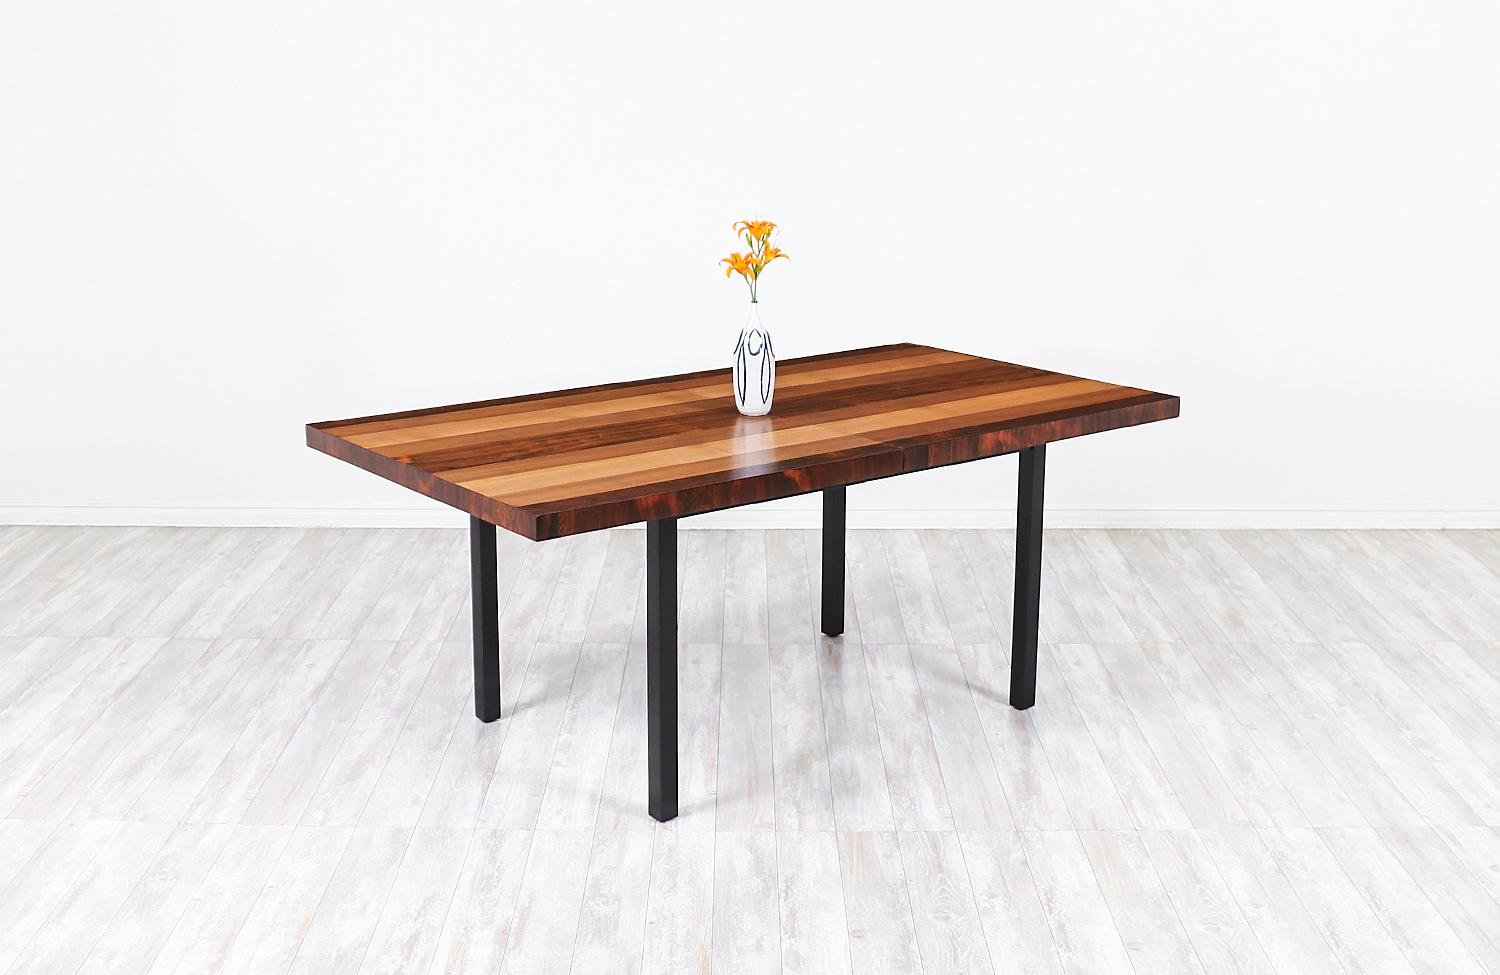 Milo Baughman expanding multi-wood dining table for Directional

Dimensions
29.5in H x 72in-112in W x 39in D
2x leaves - 20in each.